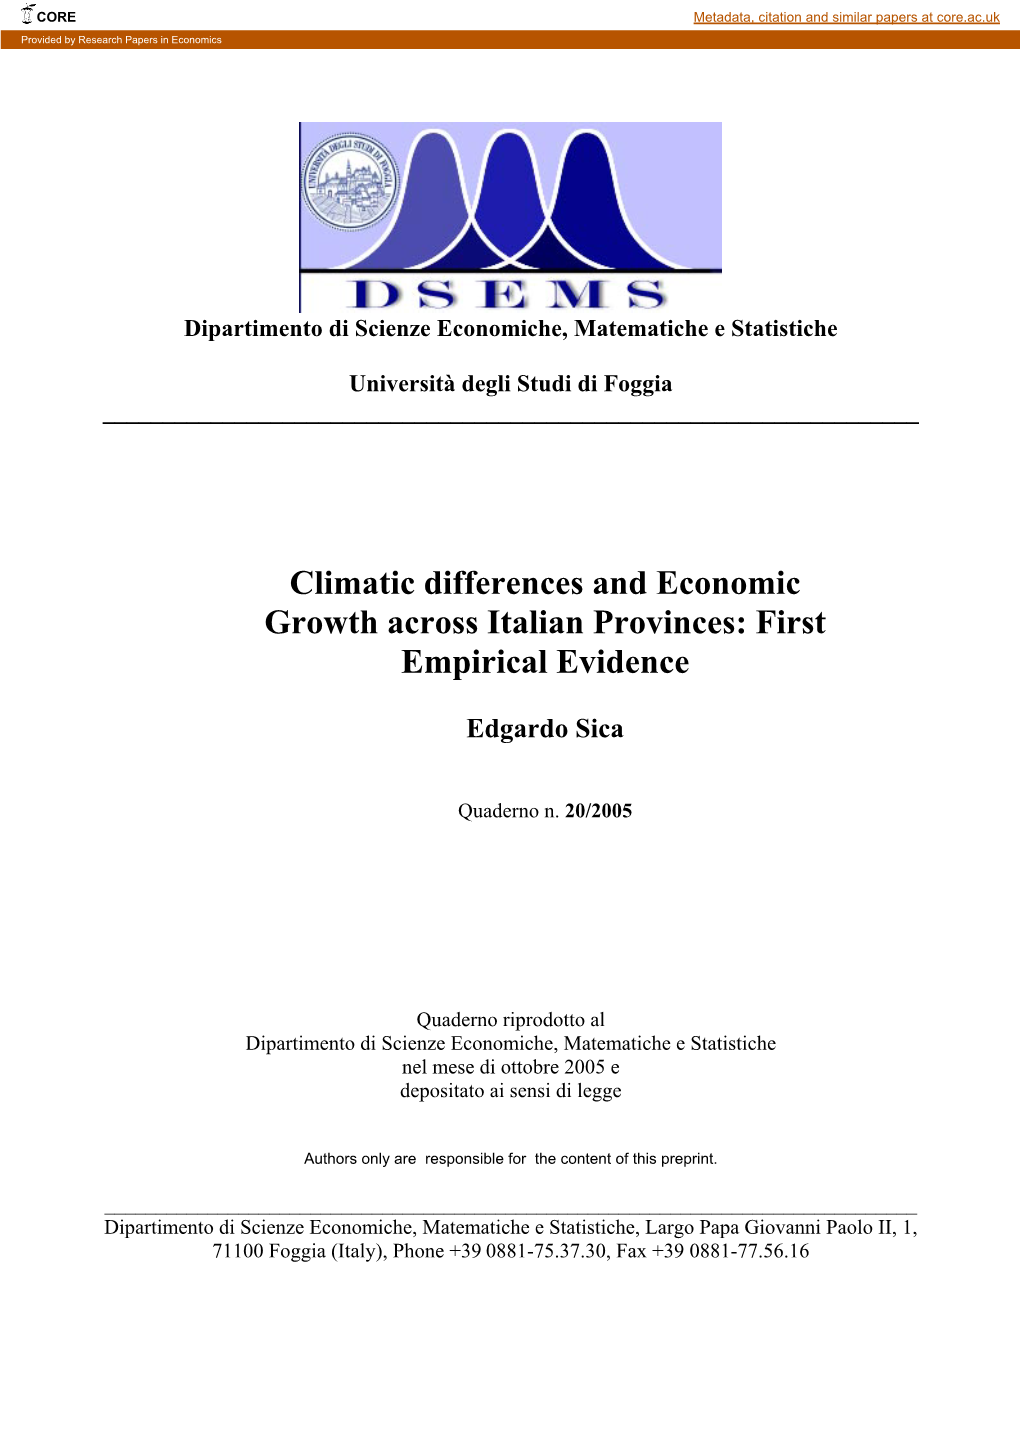 Climatic Differences and Economic Growth Across Italian Provinces: First Empirical Evidence